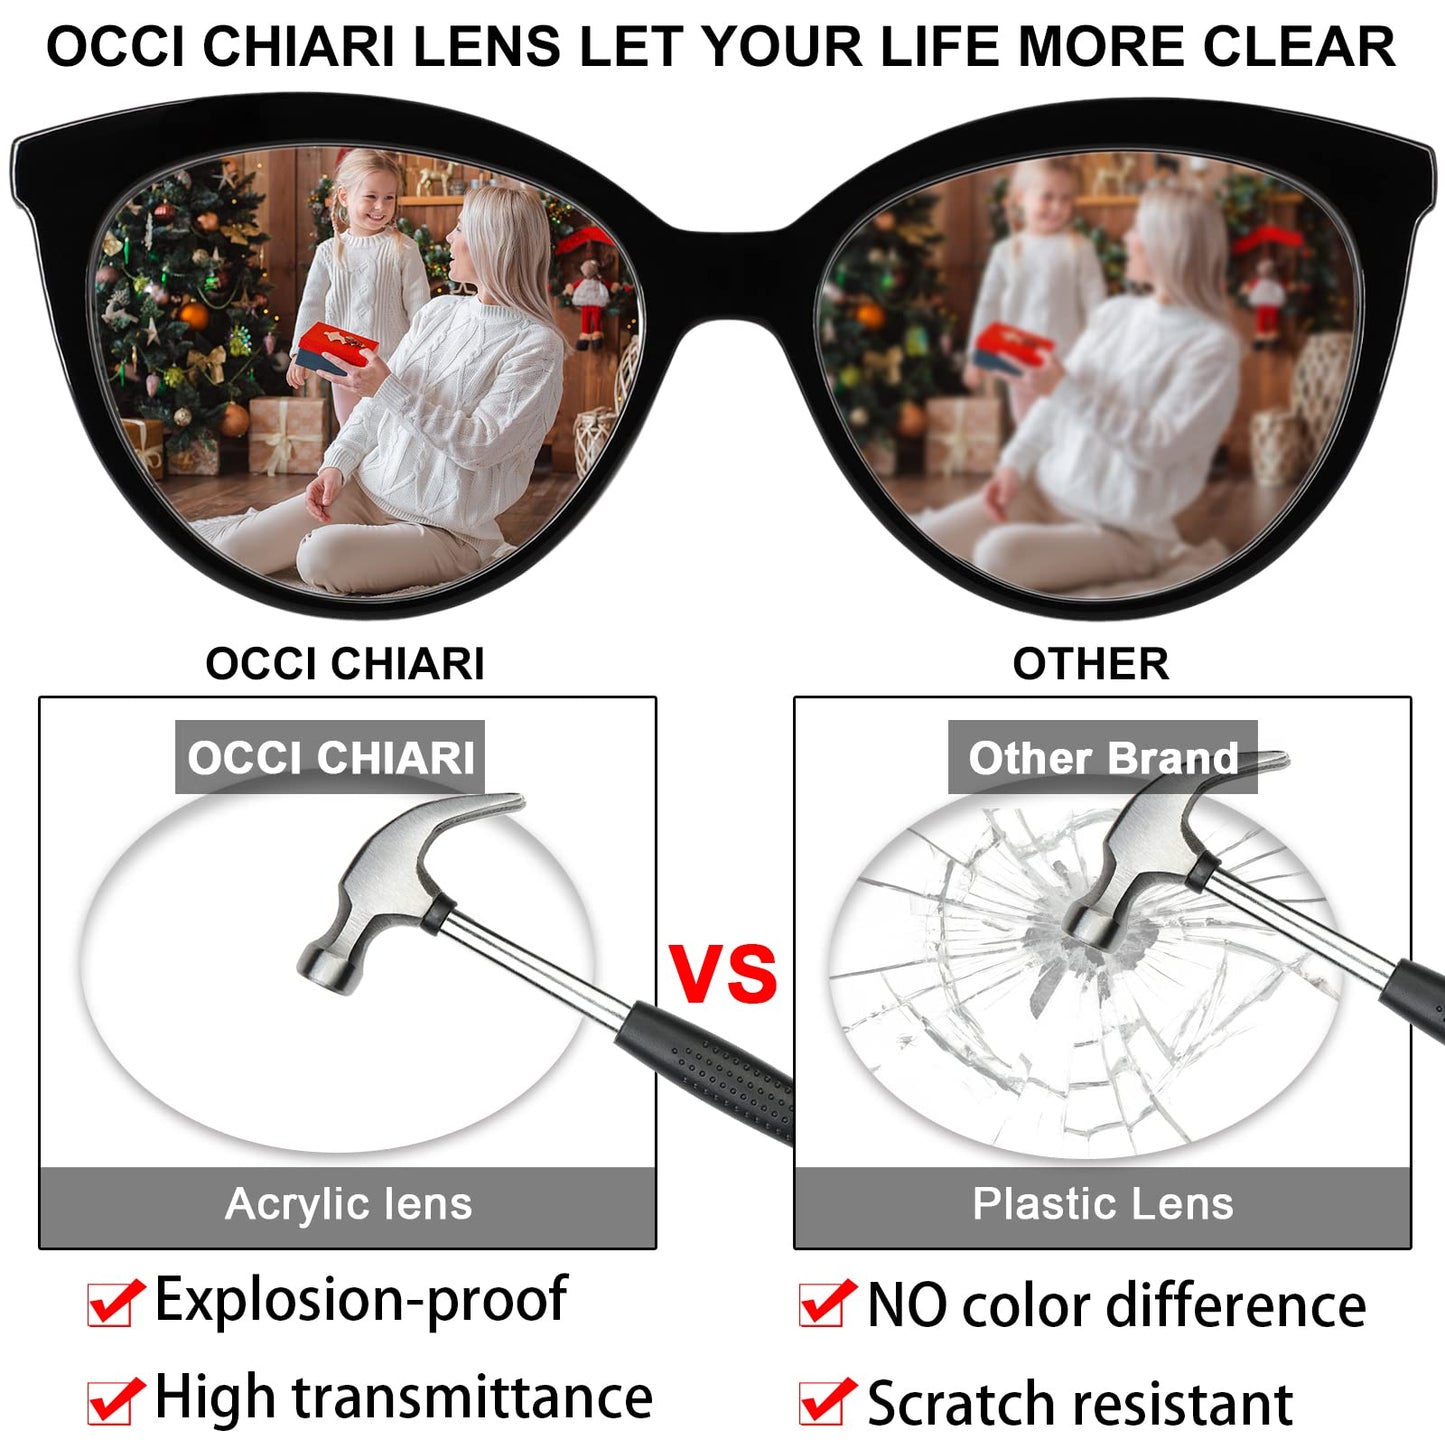 OCCI CHIARI Women's Readers Sturdy Reading Glasses with Metal Spring Hinge(1.0 1.25 1.5 1.75 2.0 2.25 2.5 2.75 3.0 3.5)